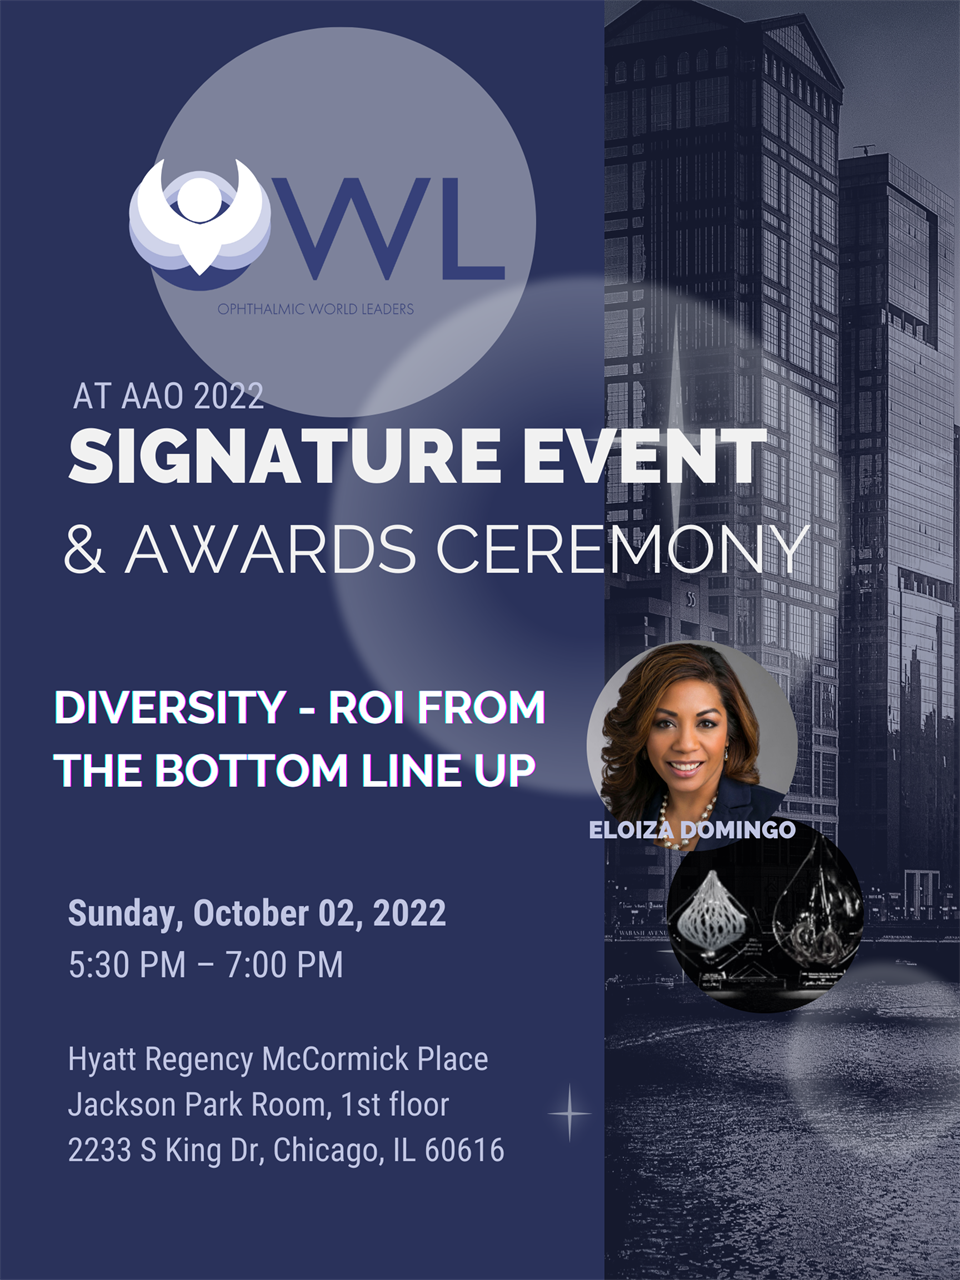 OWL at AAO Signature Event & Awards Ceremony; October 2, 2022; 5:30-7:00 PM CDT (Hyatt Regency McCormick Place (Jackson Park Room, First Floor) | 2233 S King Dr, Chicago, IL 60616) Keynote Address: DIVERSITY - ROI FROM THE BOTTOM LINE UP; Speaker: Eloiza Domingo with Allstate